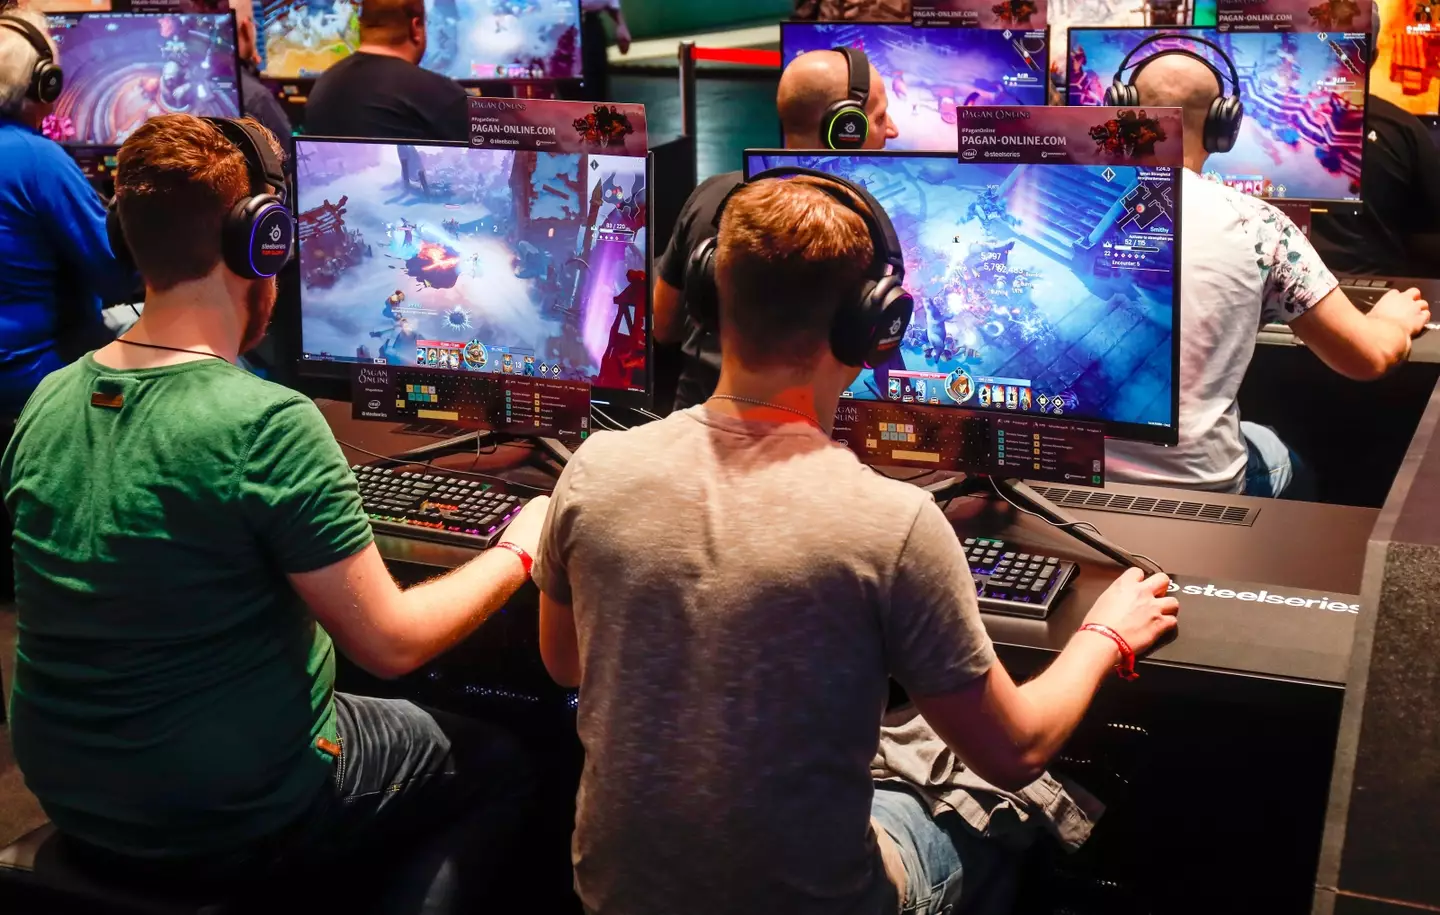 Studies have estimated how many people who play video games are affected by gaming addiction.